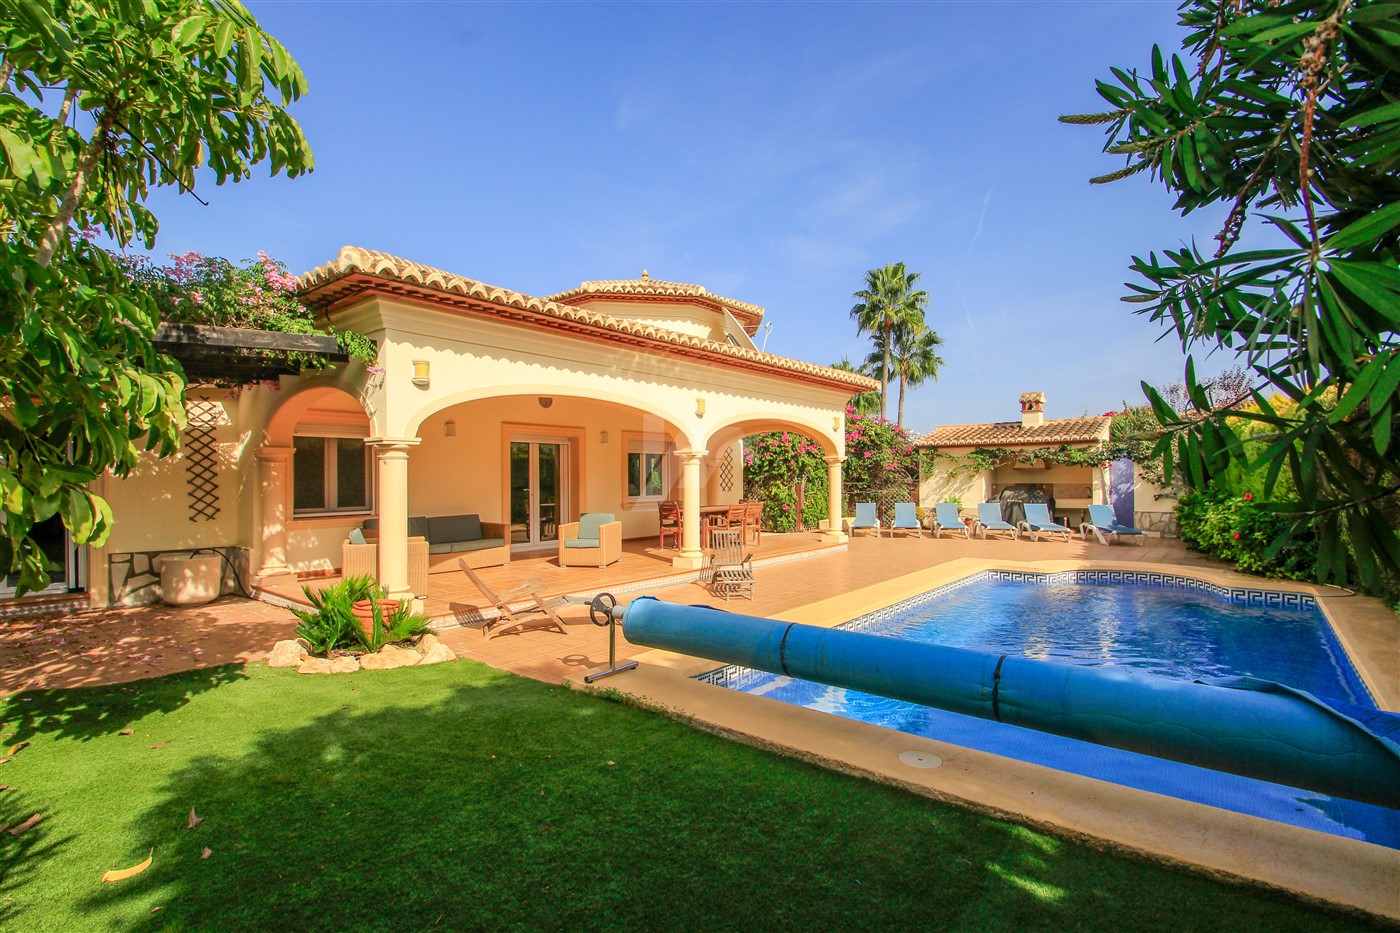 Villa for sale in Moraira, walking distance to town.